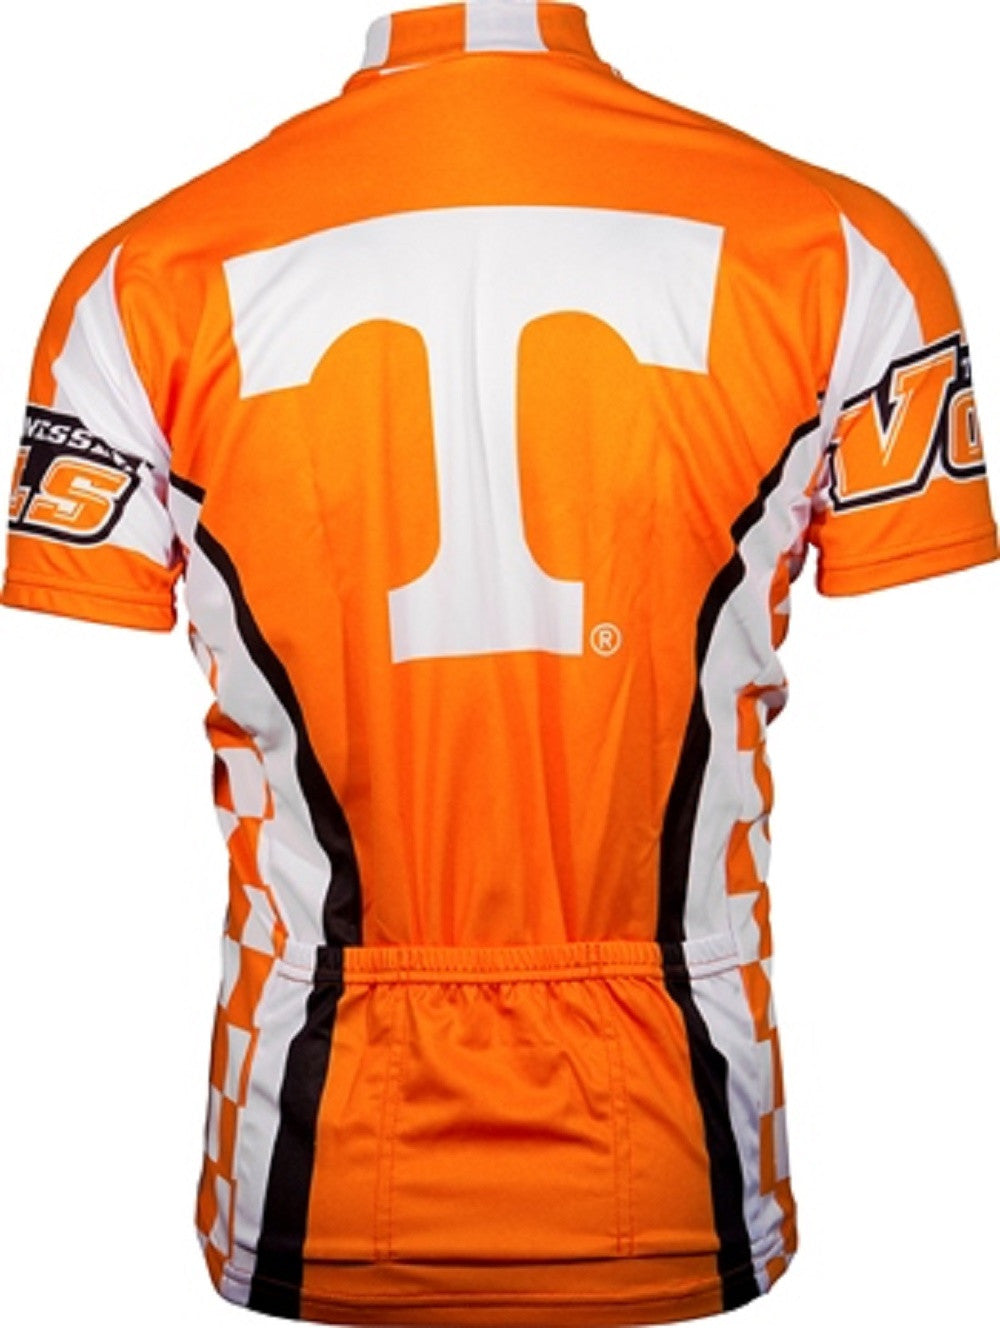 Tennessee Volunteers Men's Cycling Jersey (S, M, L)